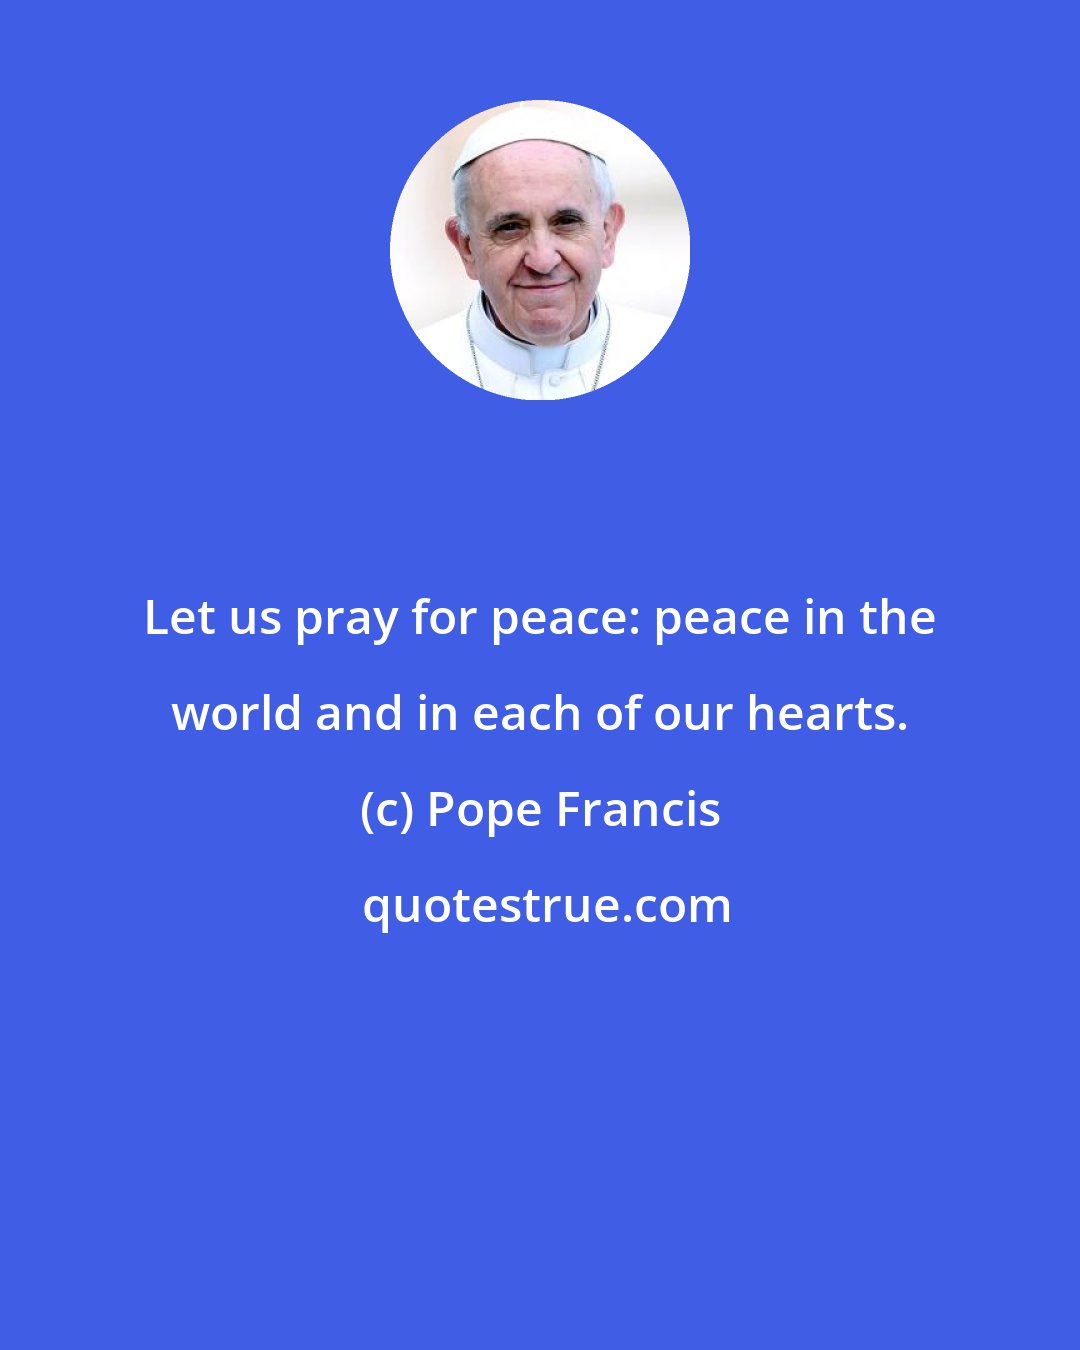 Pope Francis: Let us pray for peace: peace in the world and in each of our hearts.